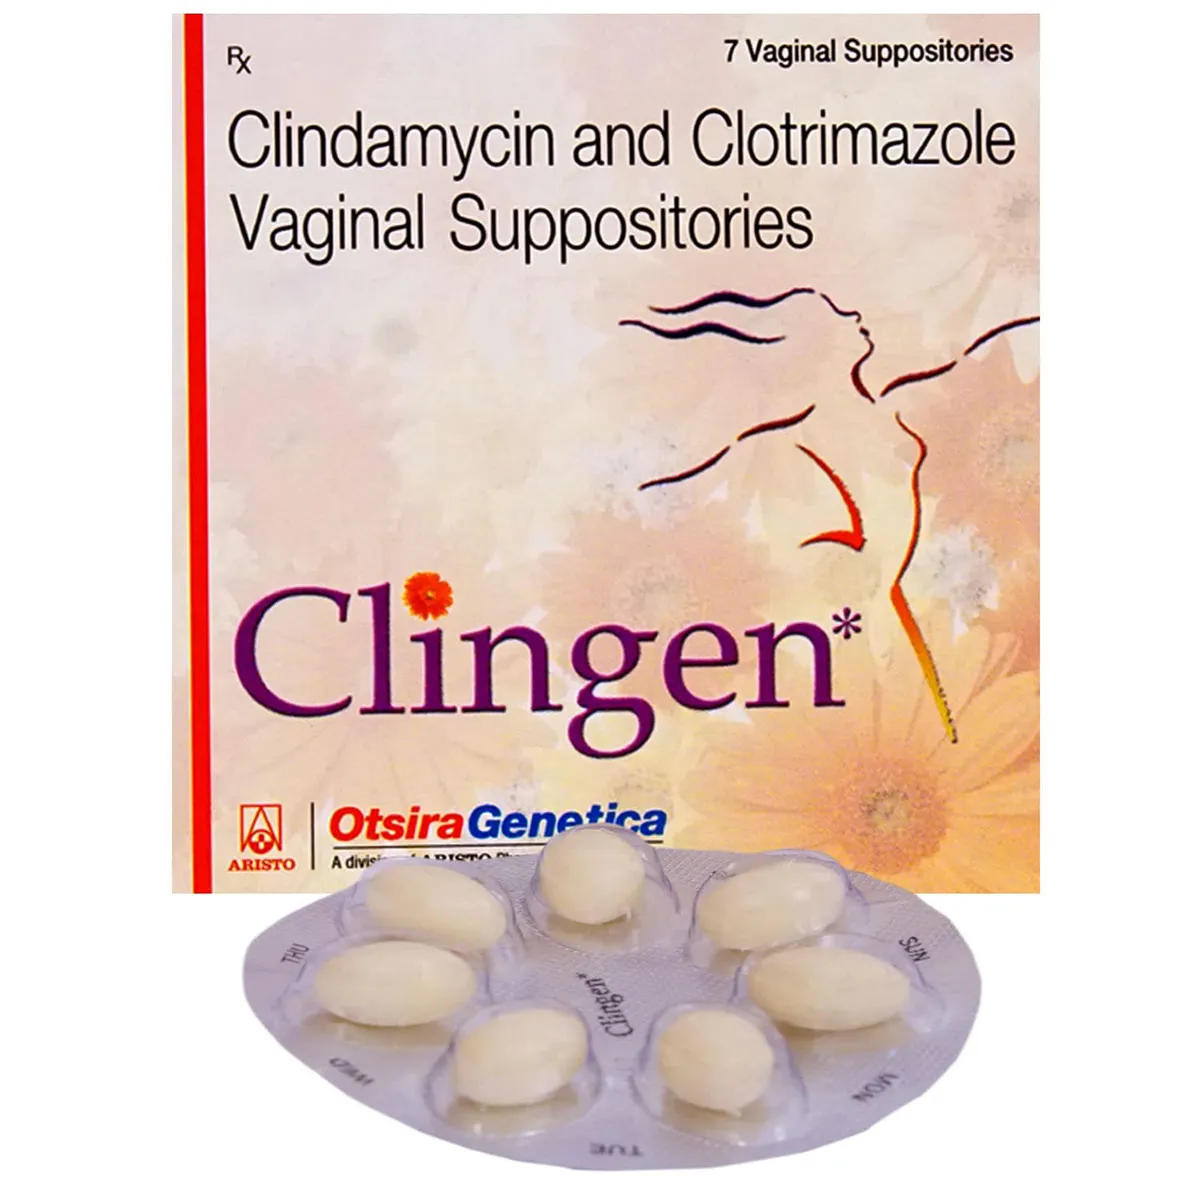 Clingen Vaginal Suppository